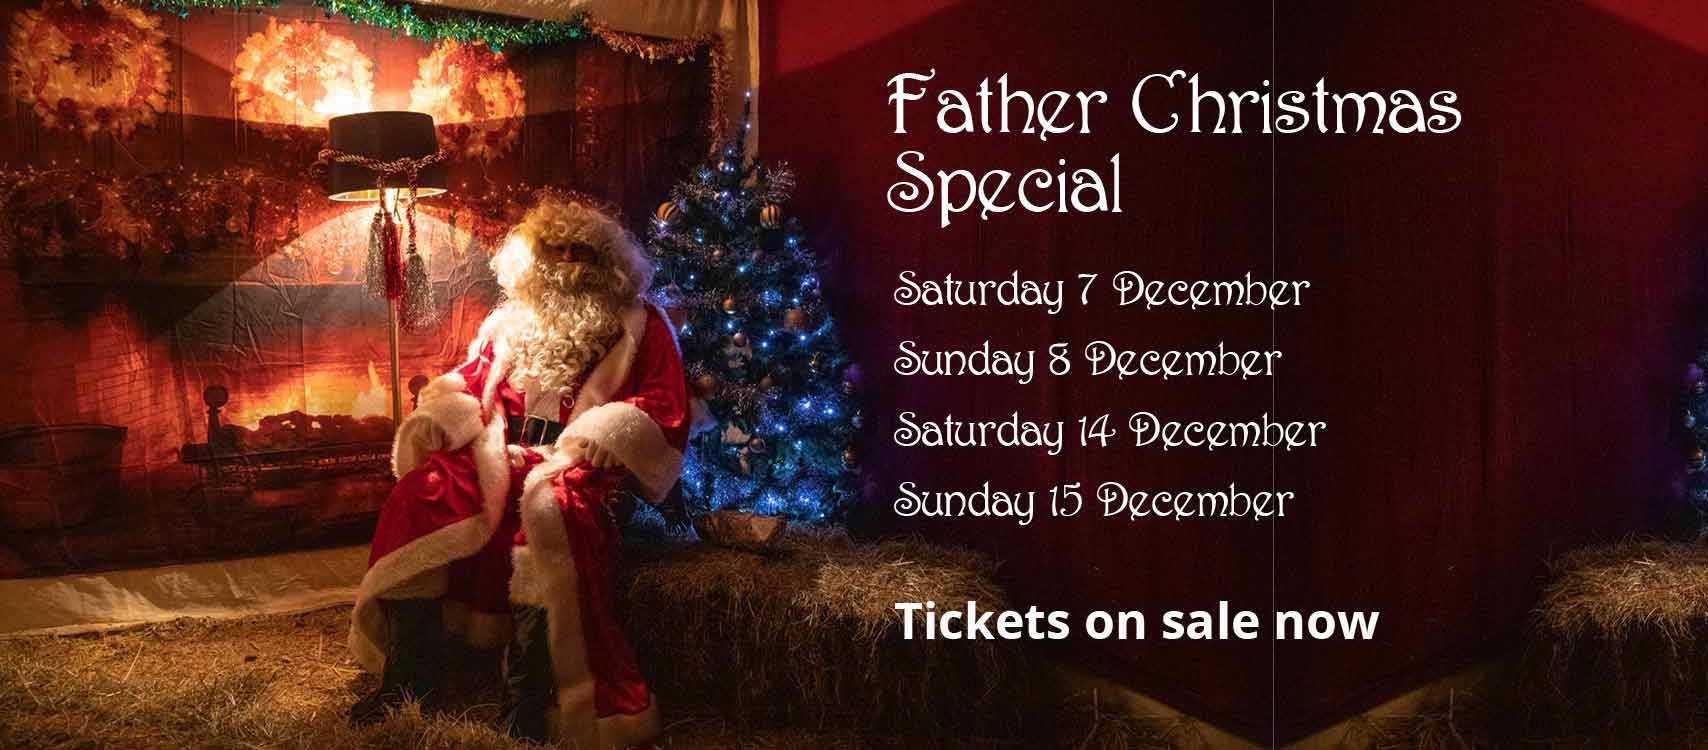 Advert for the December Father Christmas Special events